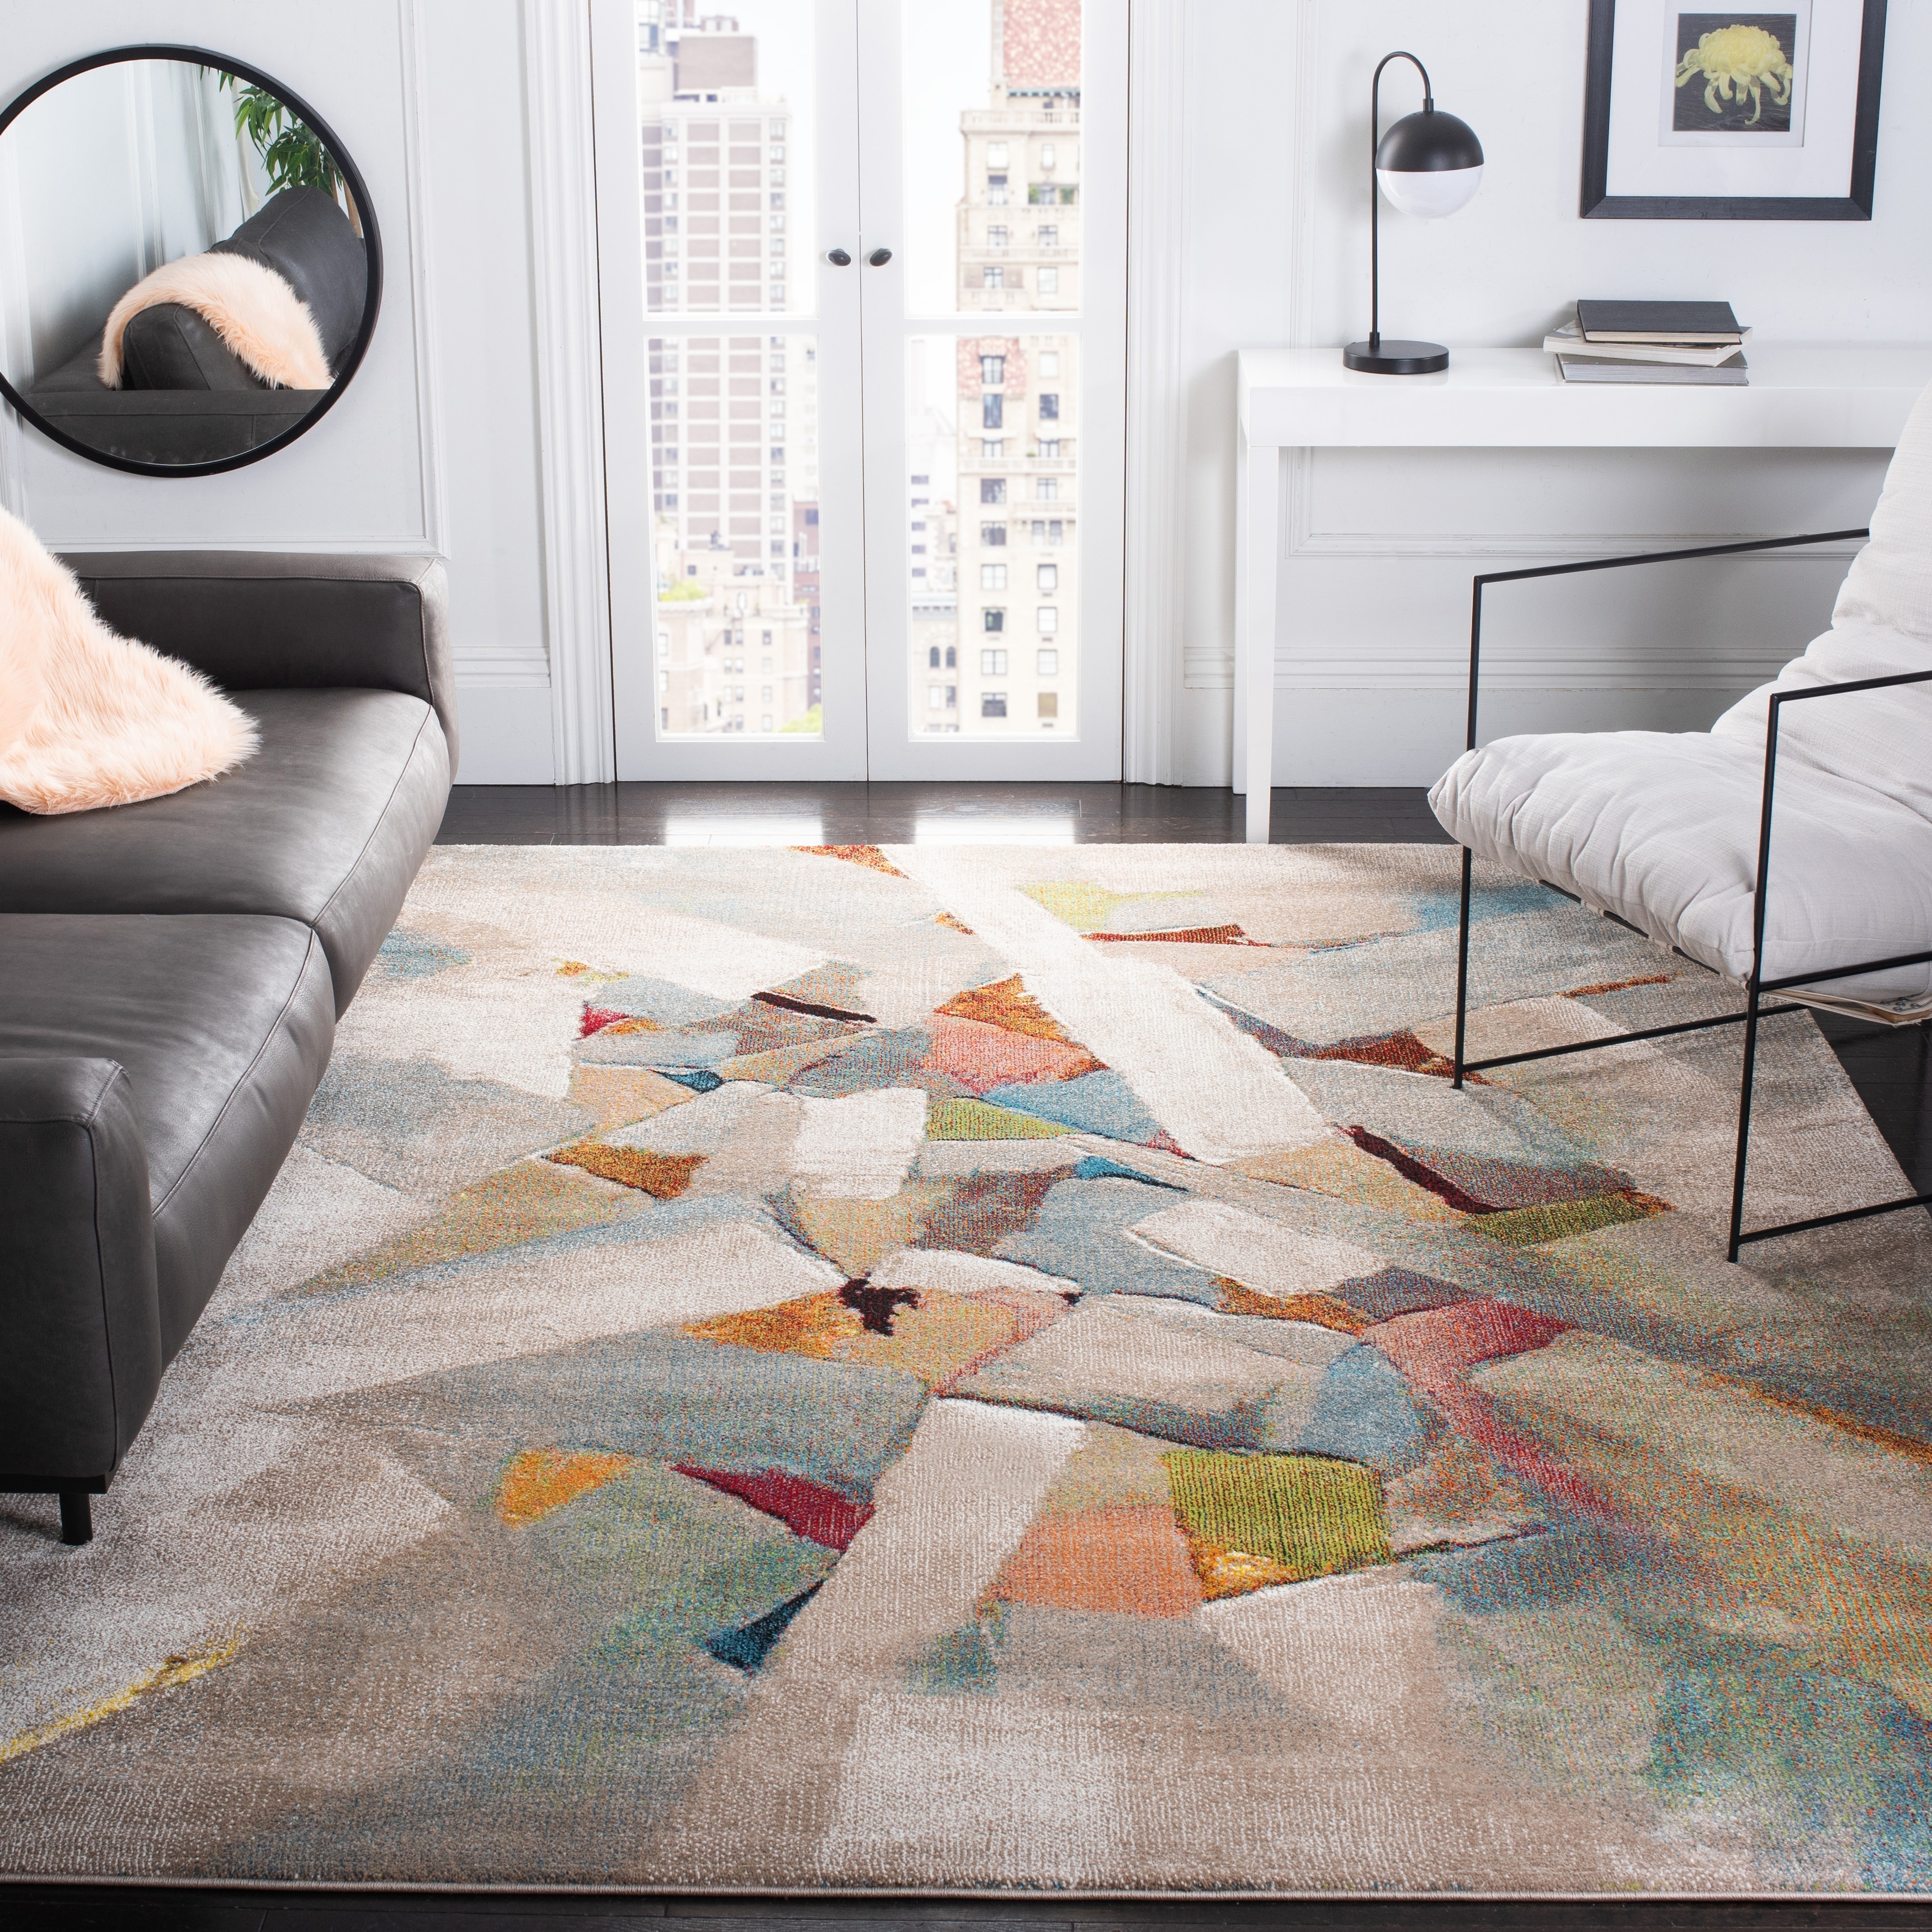 The difference between classic and modern carpets | Farahan Carpet